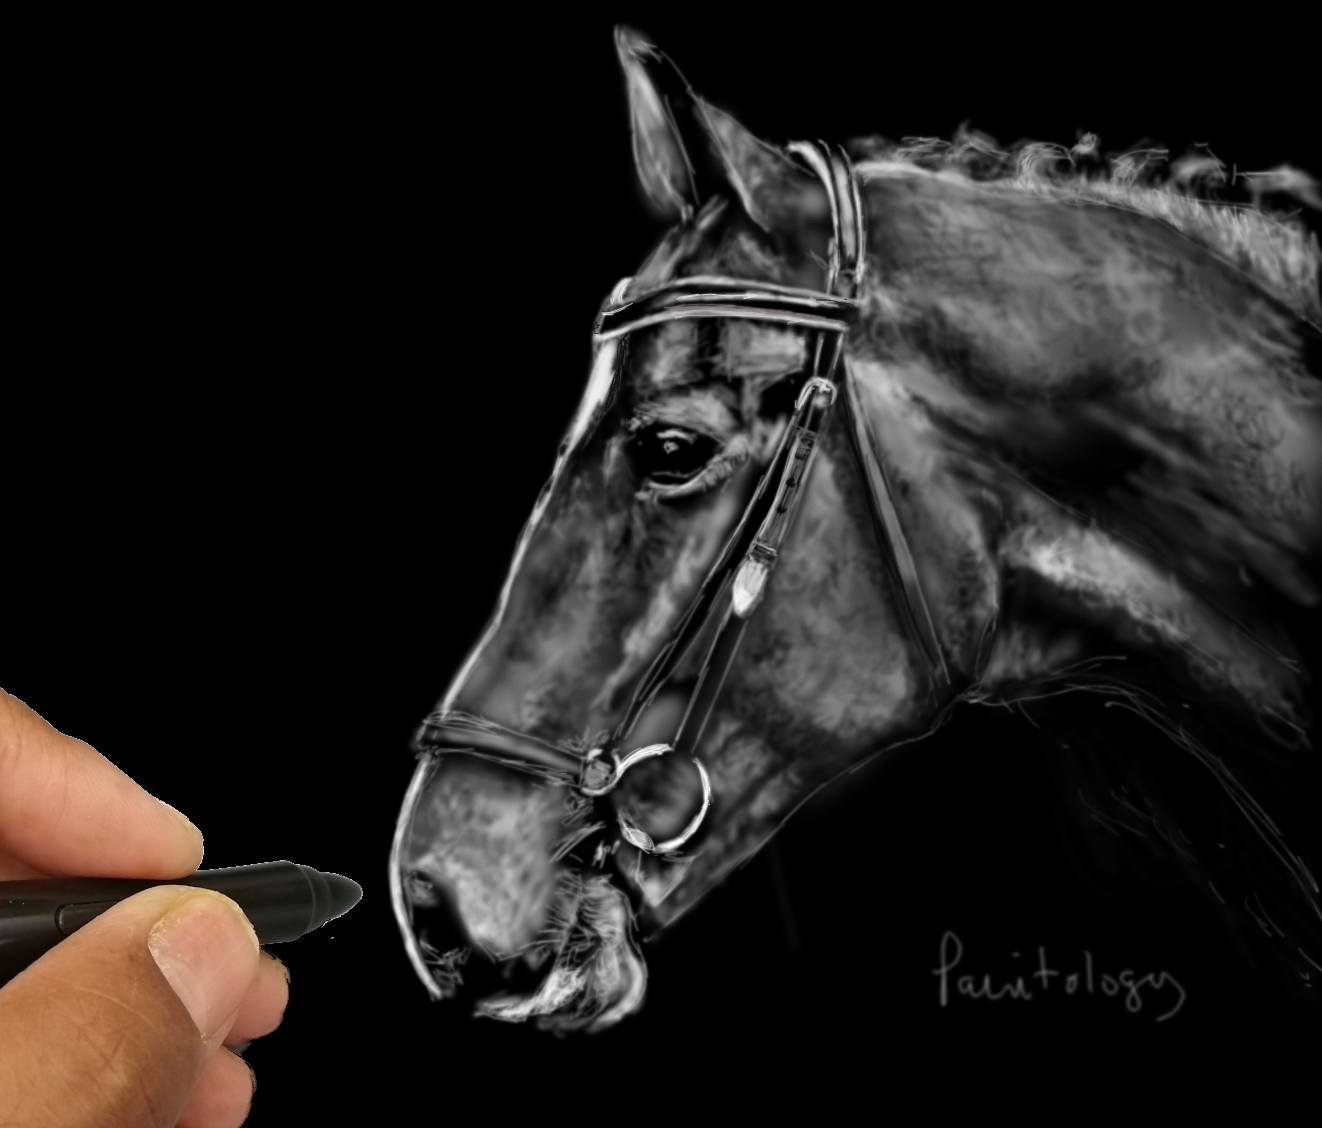 How to Draw an Advanced Horse : 5 Steps - Instructables